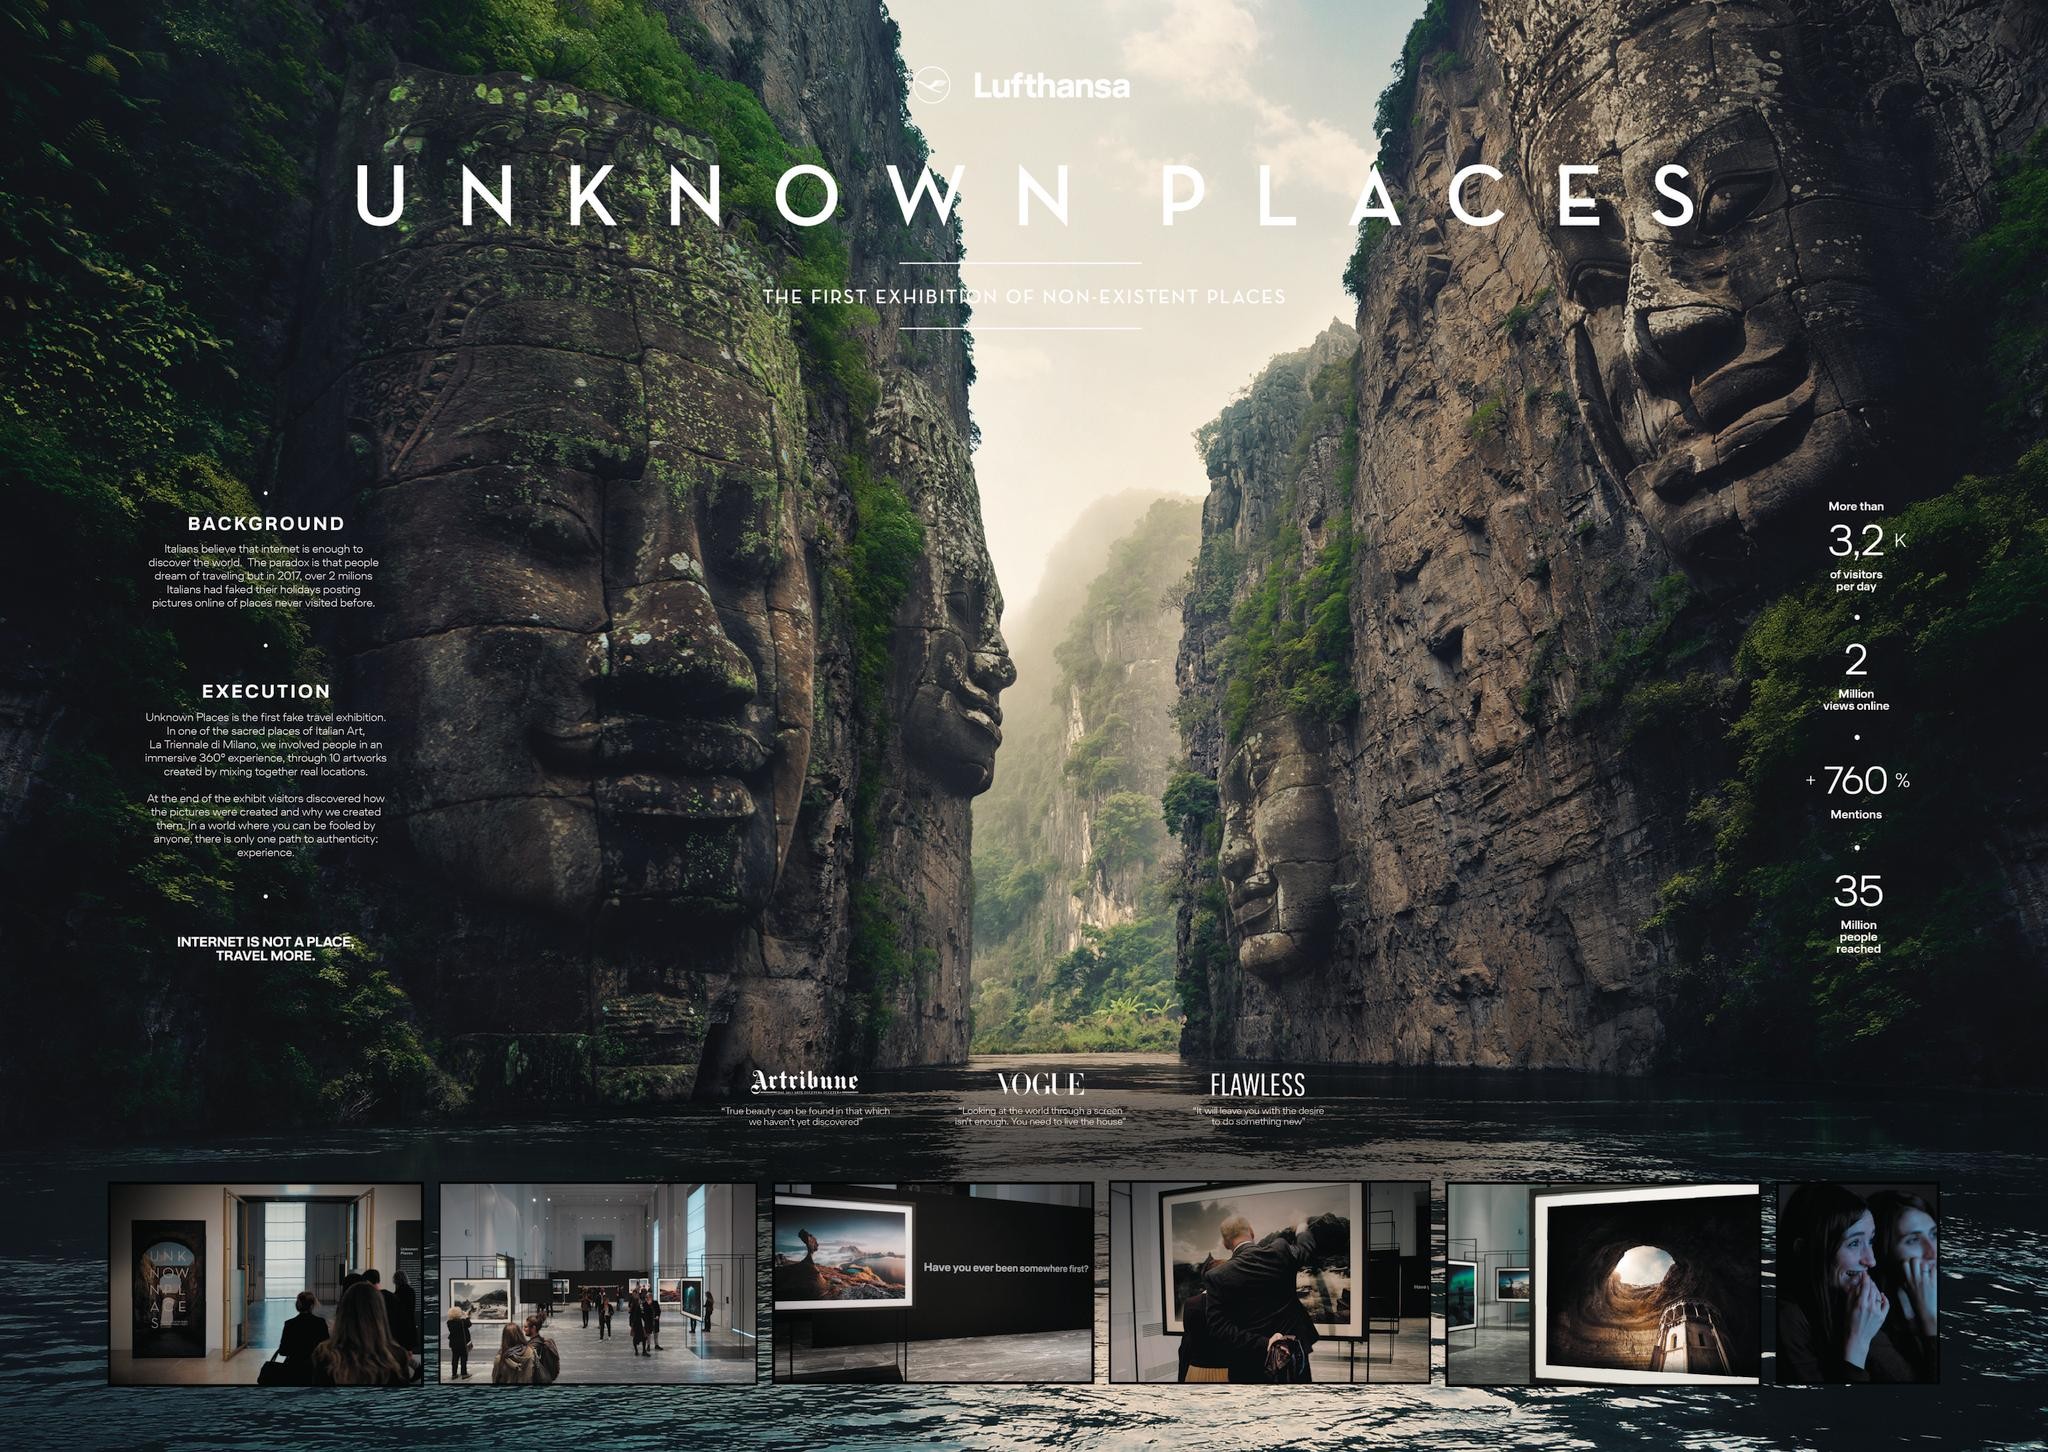 UNKNOWN PLACES- THE EXHIBITION